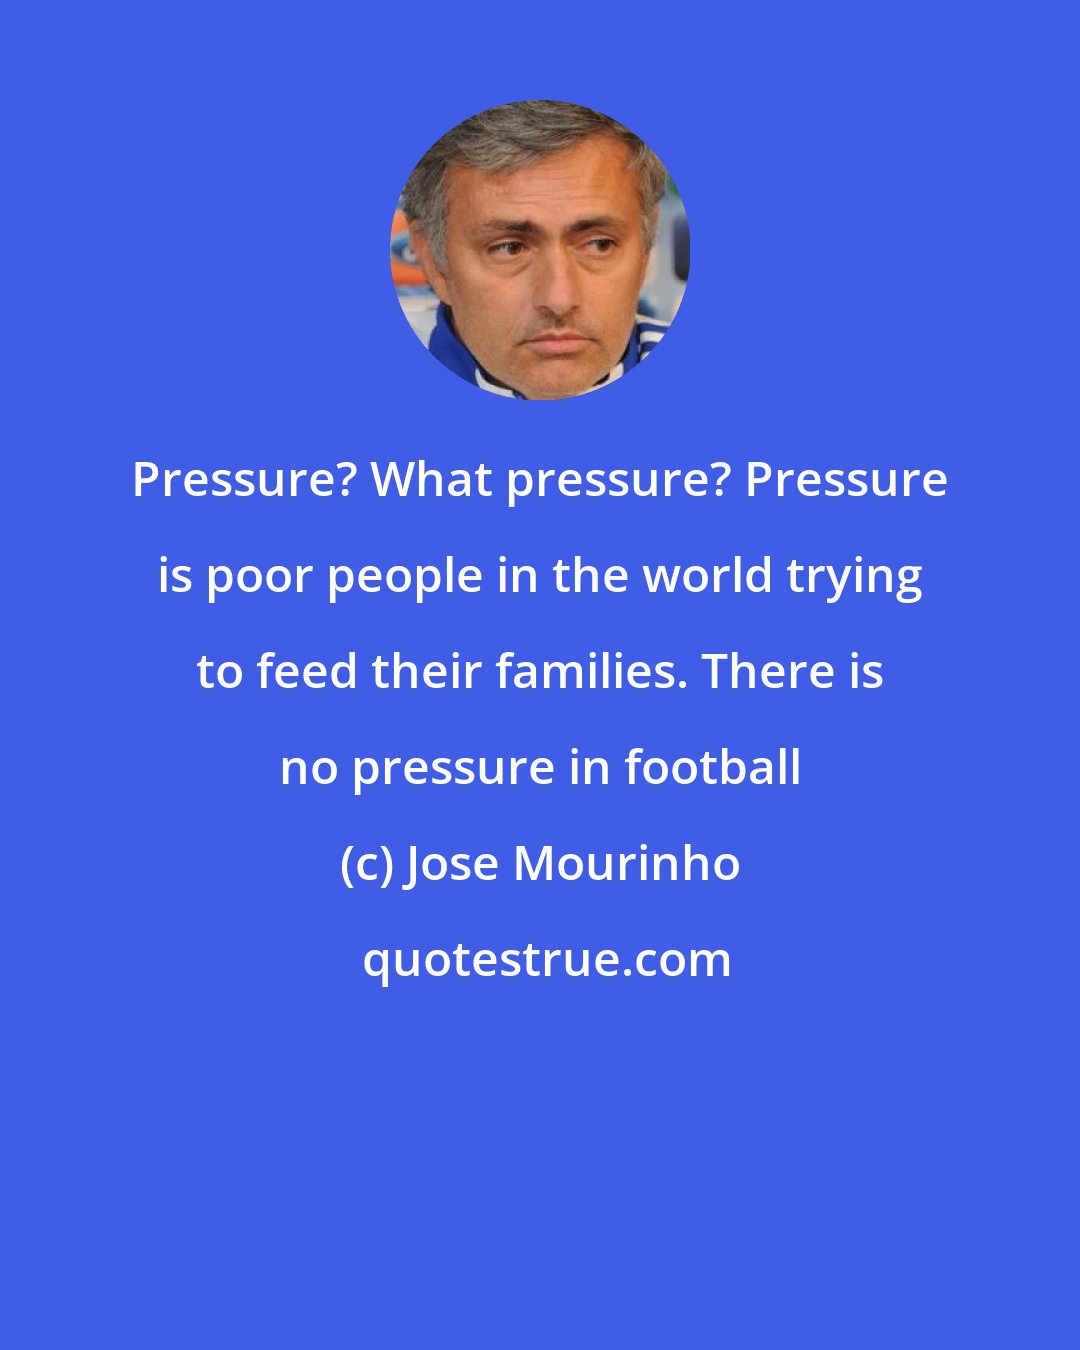 Jose Mourinho: Pressure? What pressure? Pressure is poor people in the world trying to feed their families. There is no pressure in football